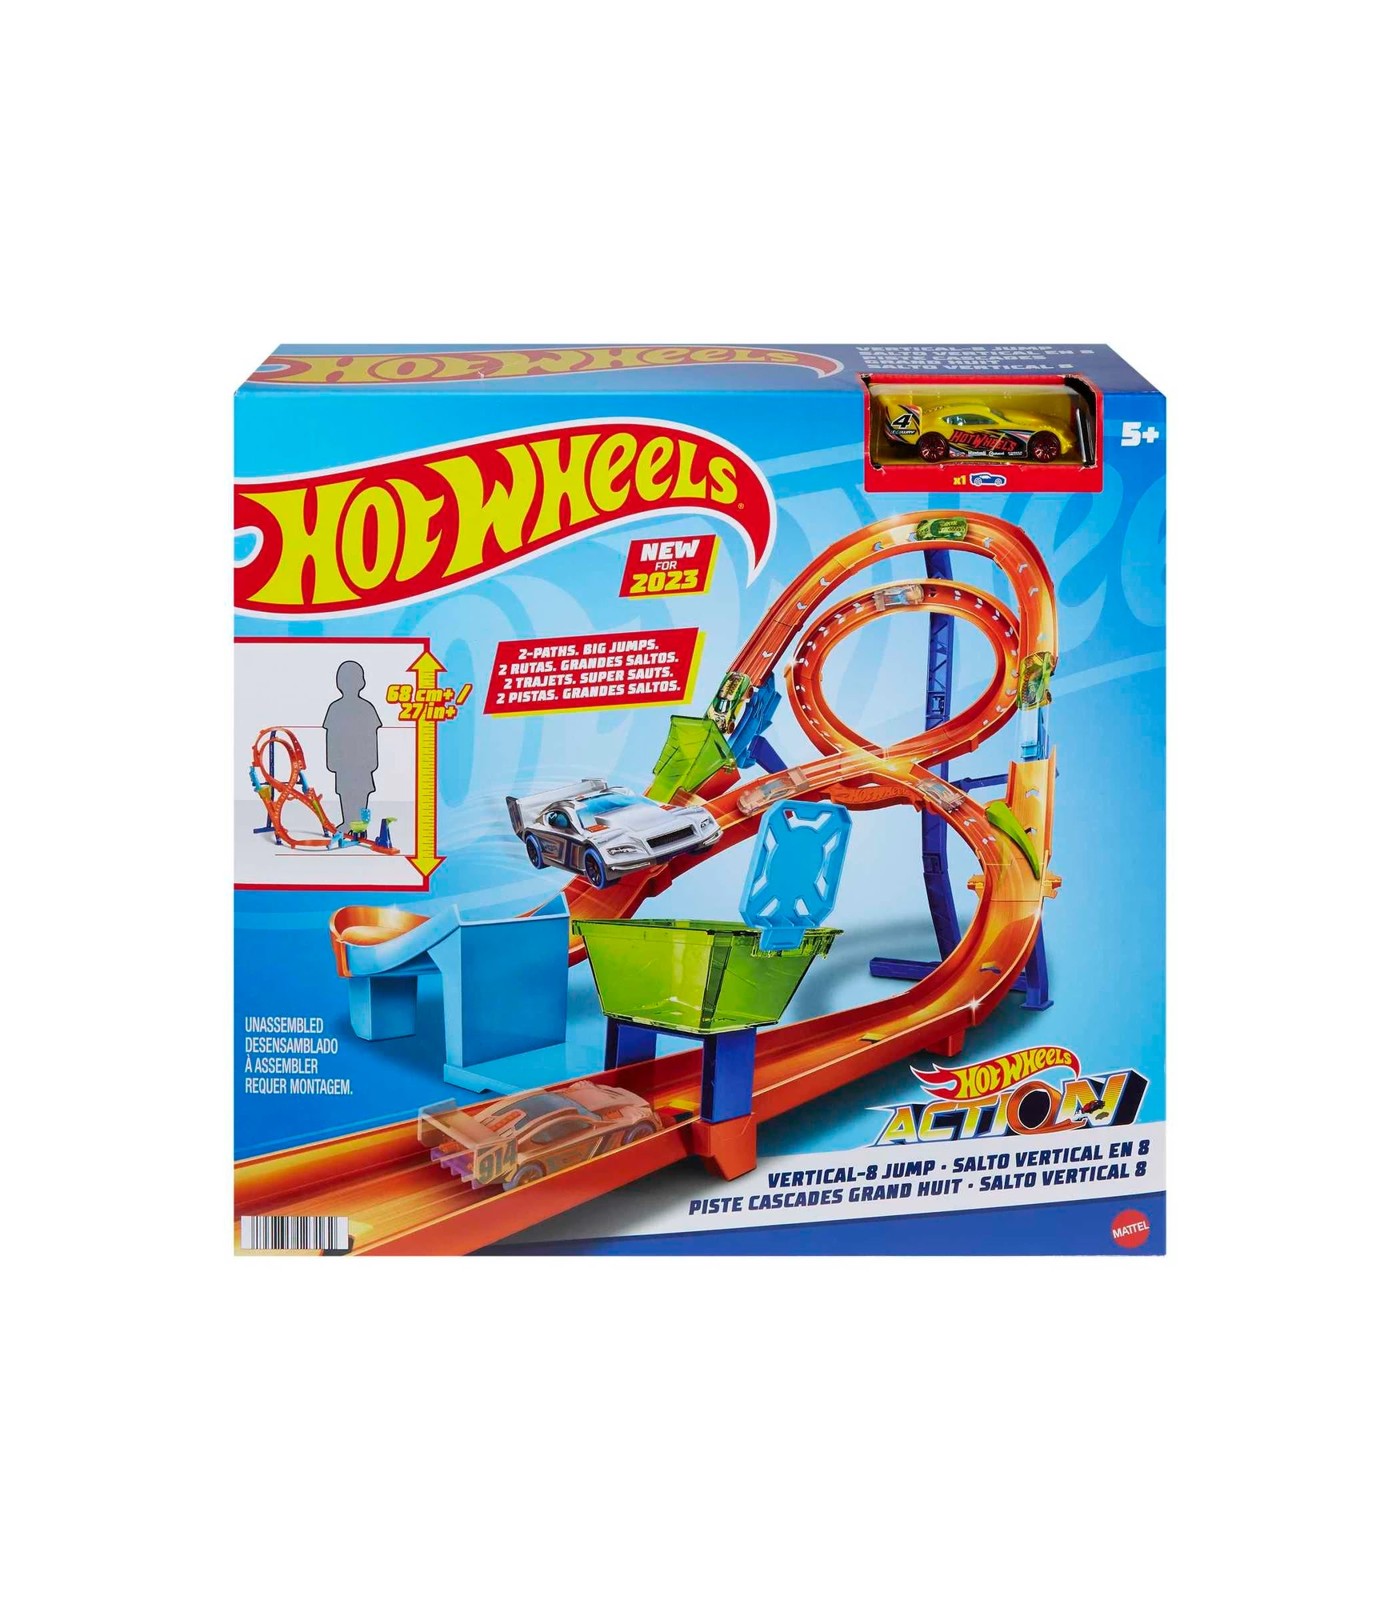 New Hot Wheels Launcher & Track Extension Authentic Mattel, Blue or Red